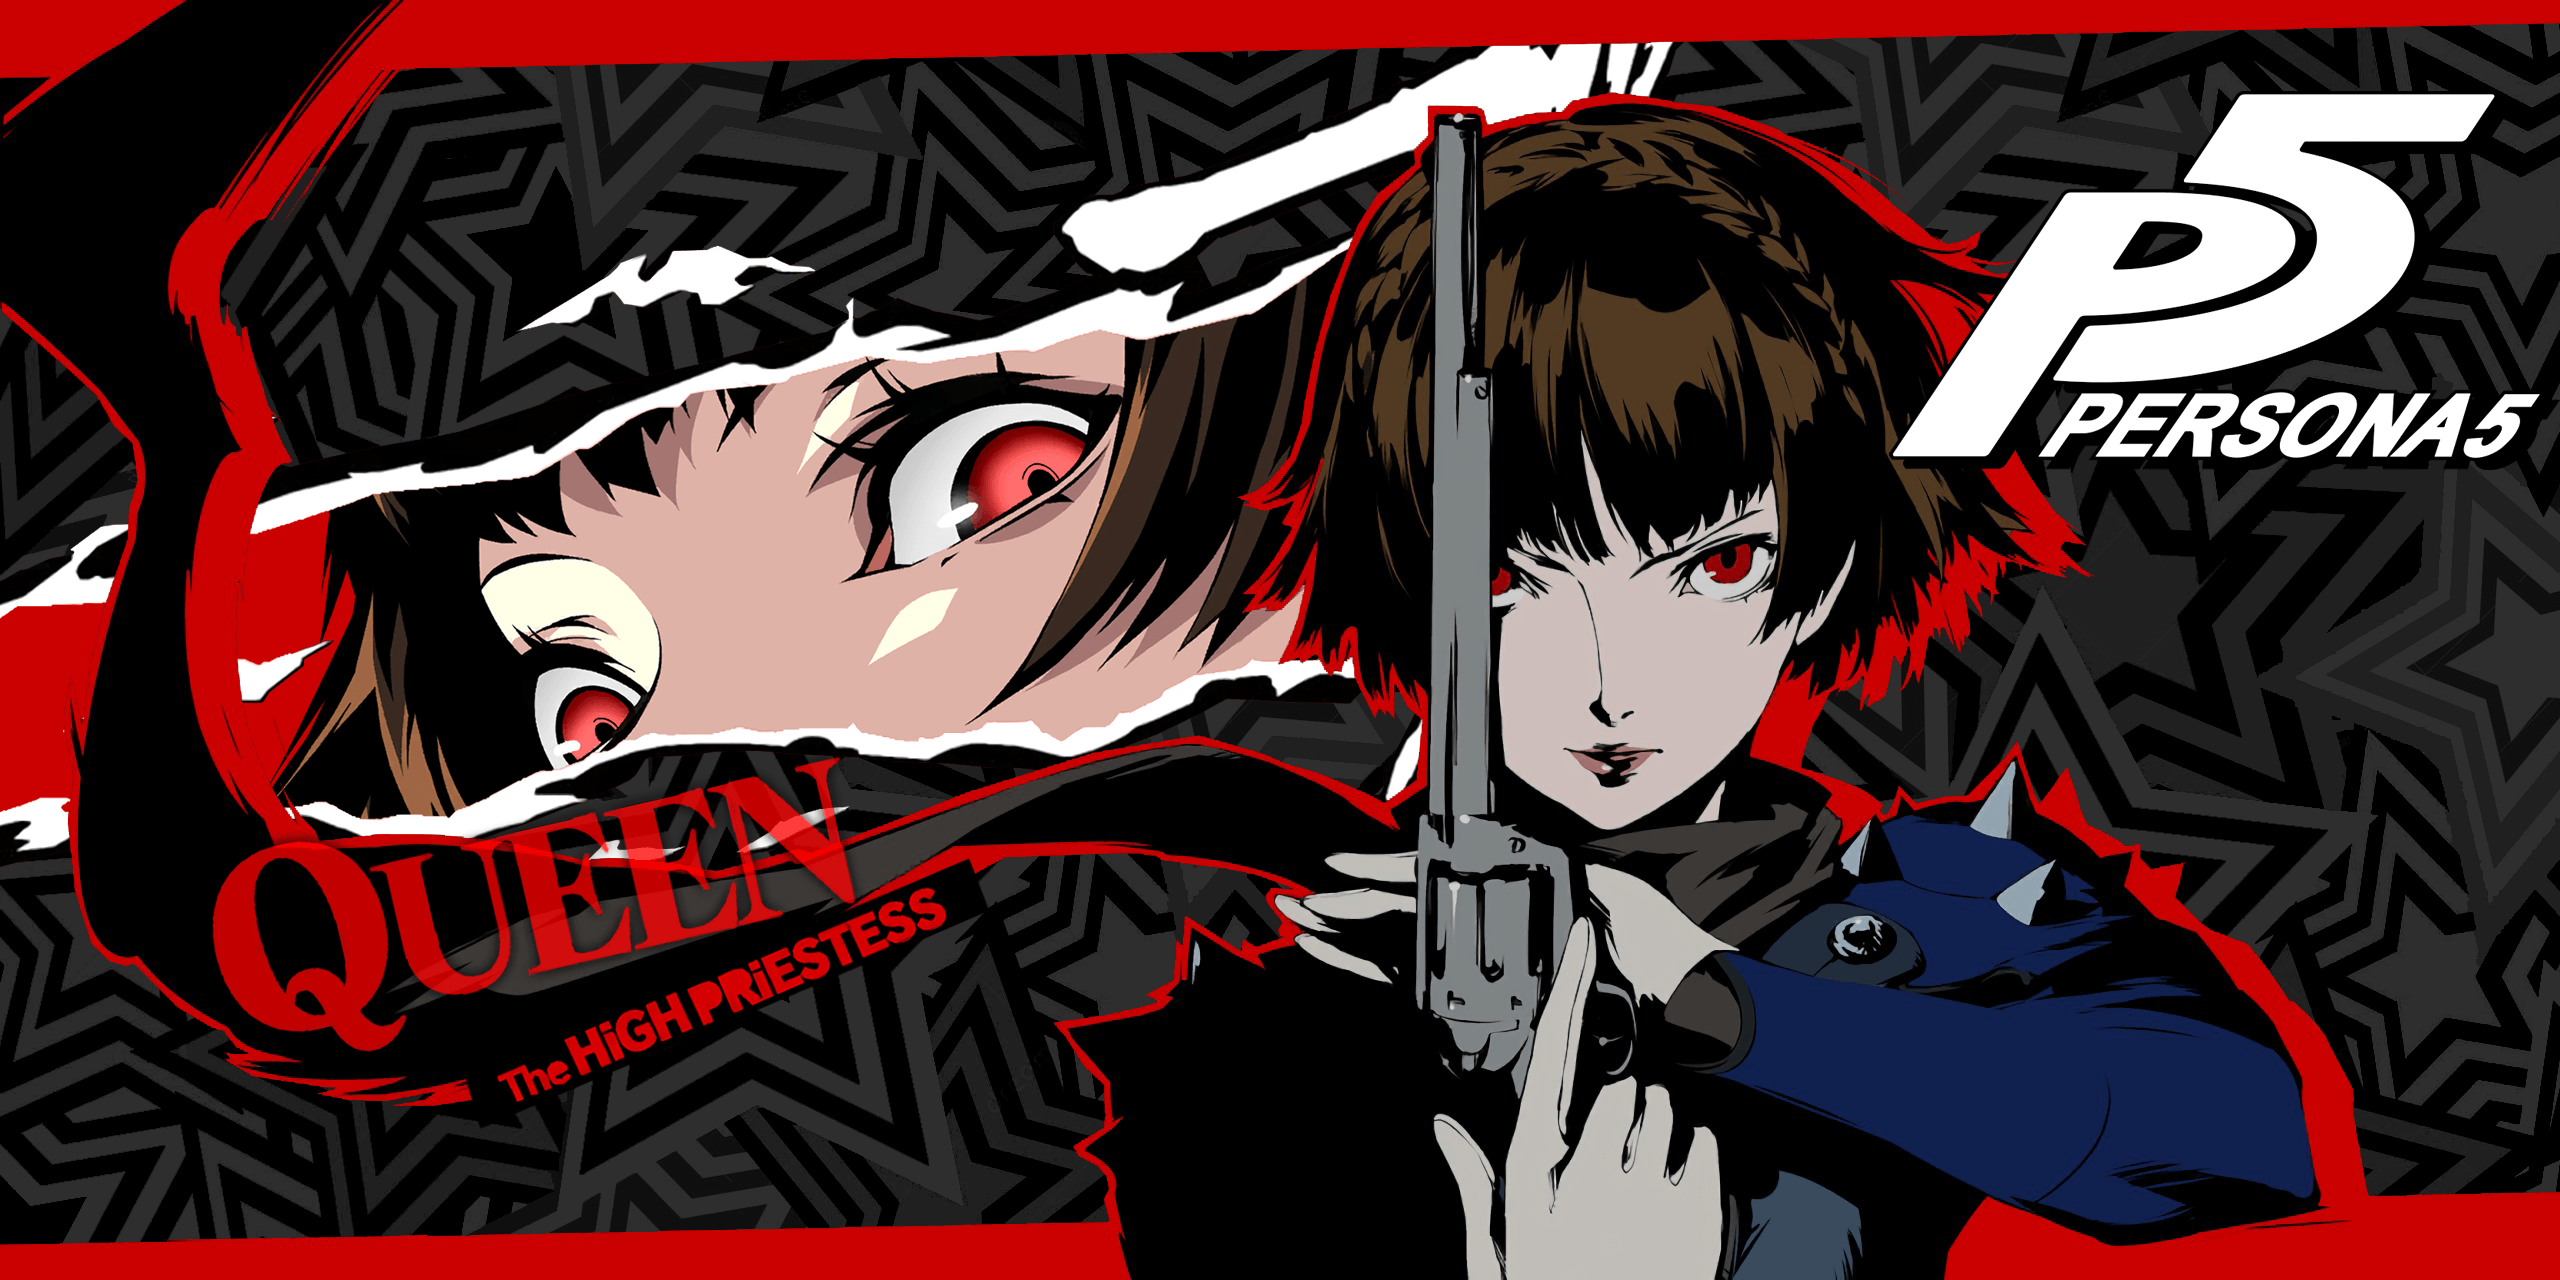 I made some Persona 5 Wallpaper